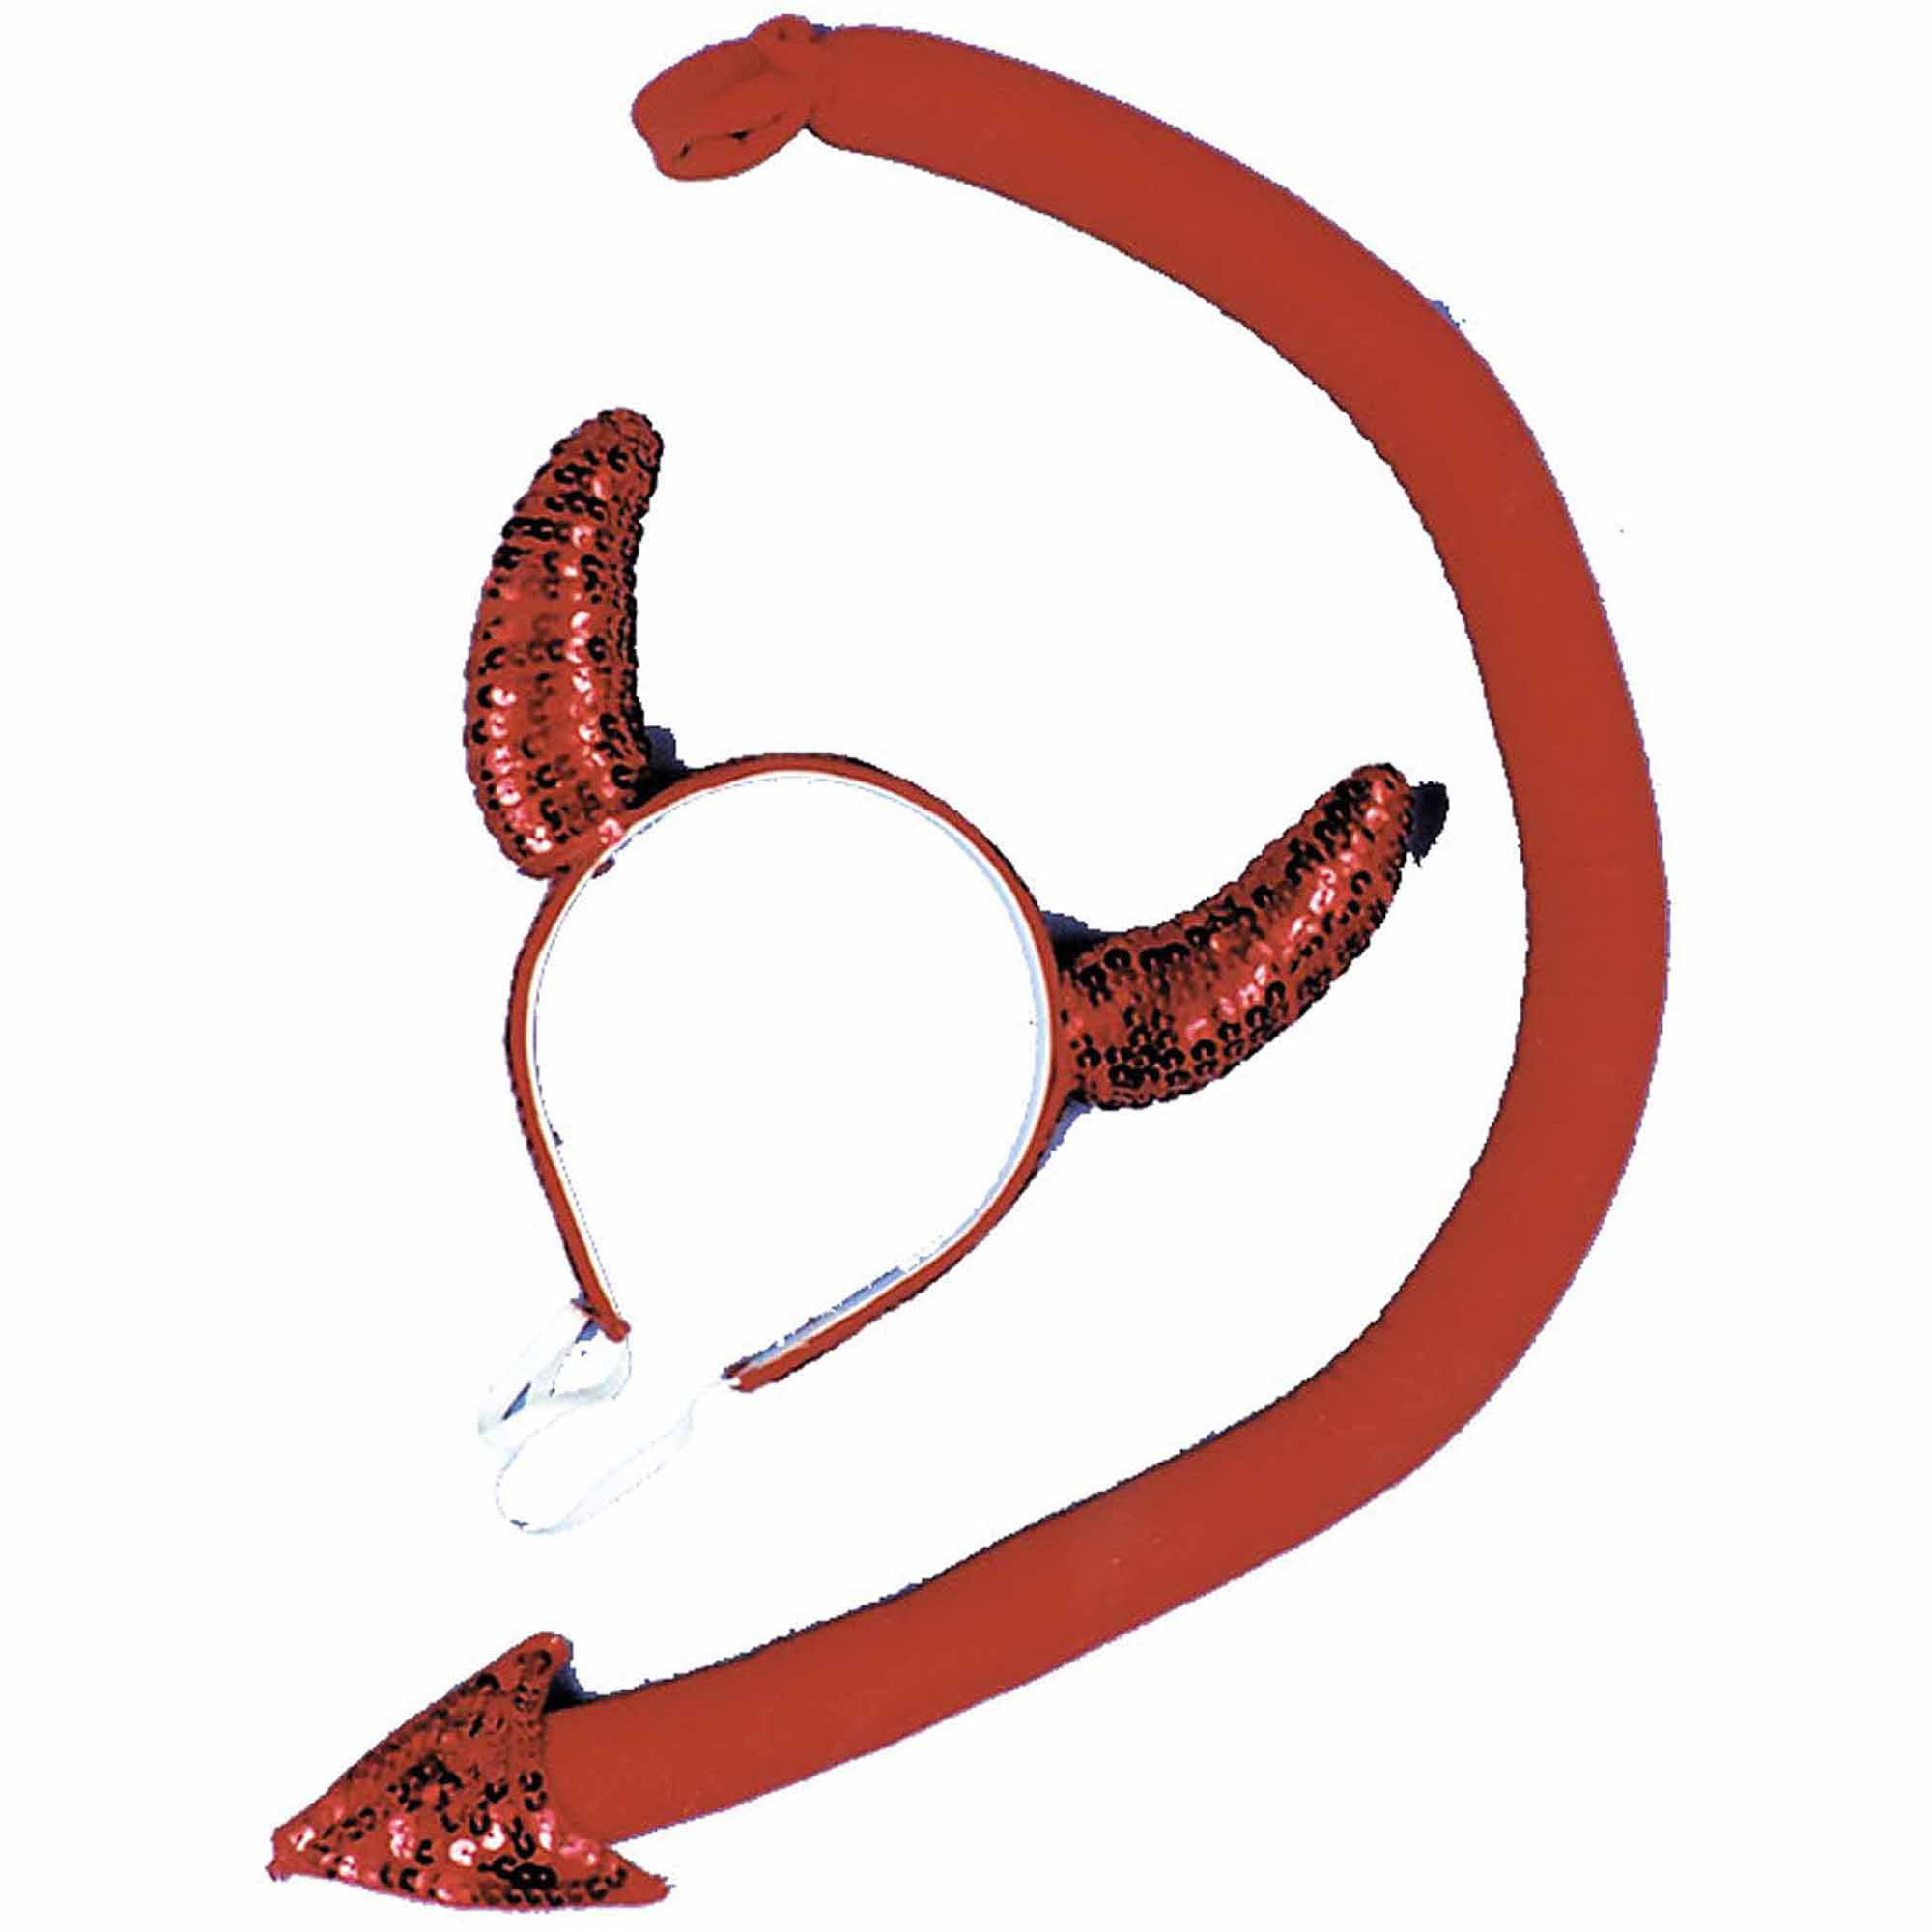 Felt Red Devil Tail with Sequin Tip Costume Accessory 31 Inches Long 